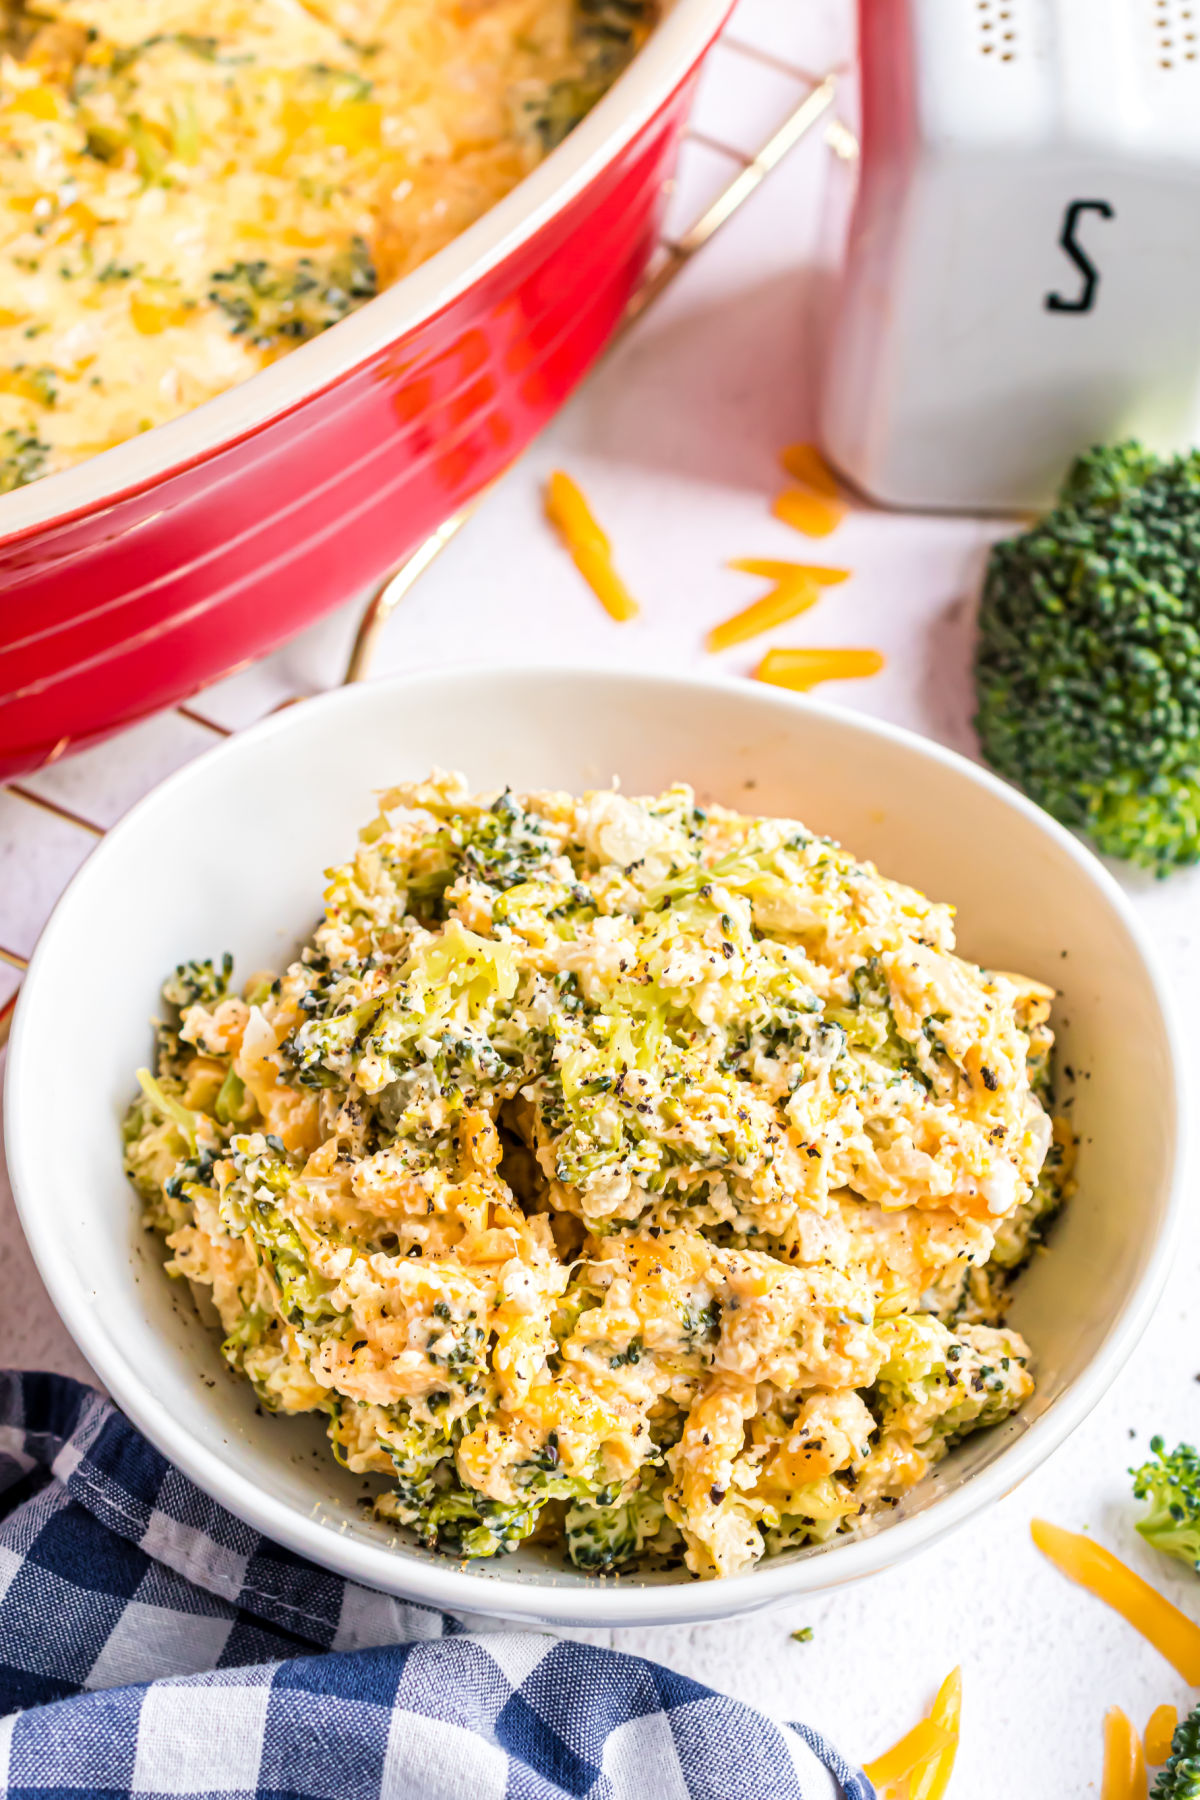 Broccoli cheese casserole scooped into a bowl for serving.